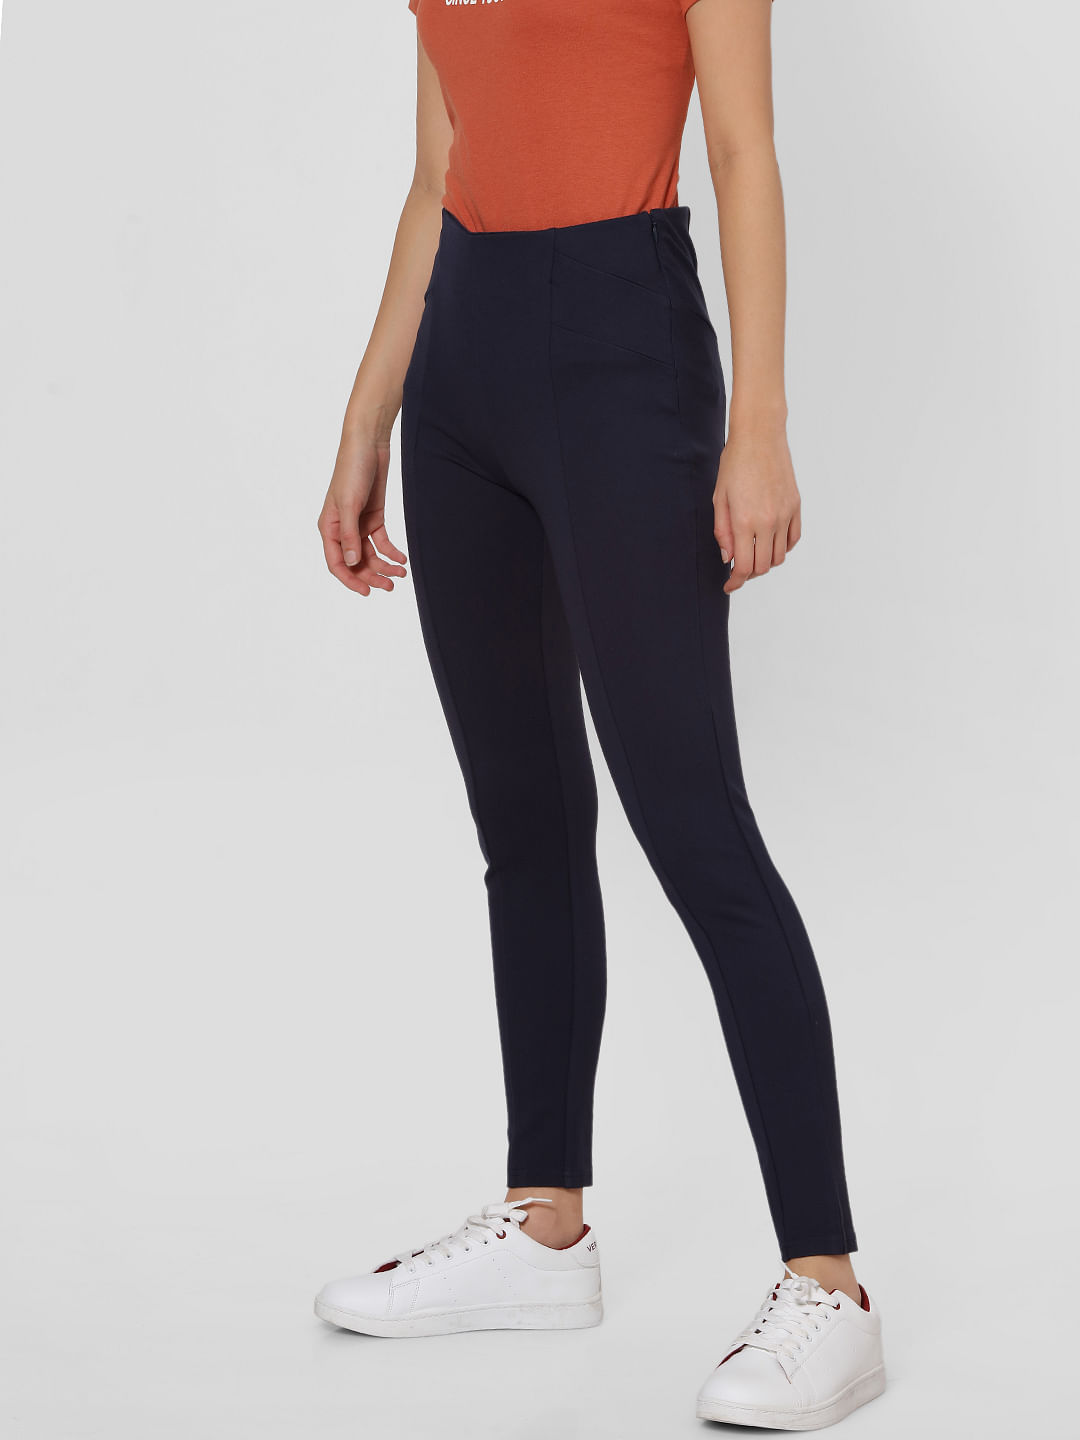 Navy Feelin' Oh So Tight Set. | Crop top and leggings, Long sleeve crop top,  Jumpsuits for women